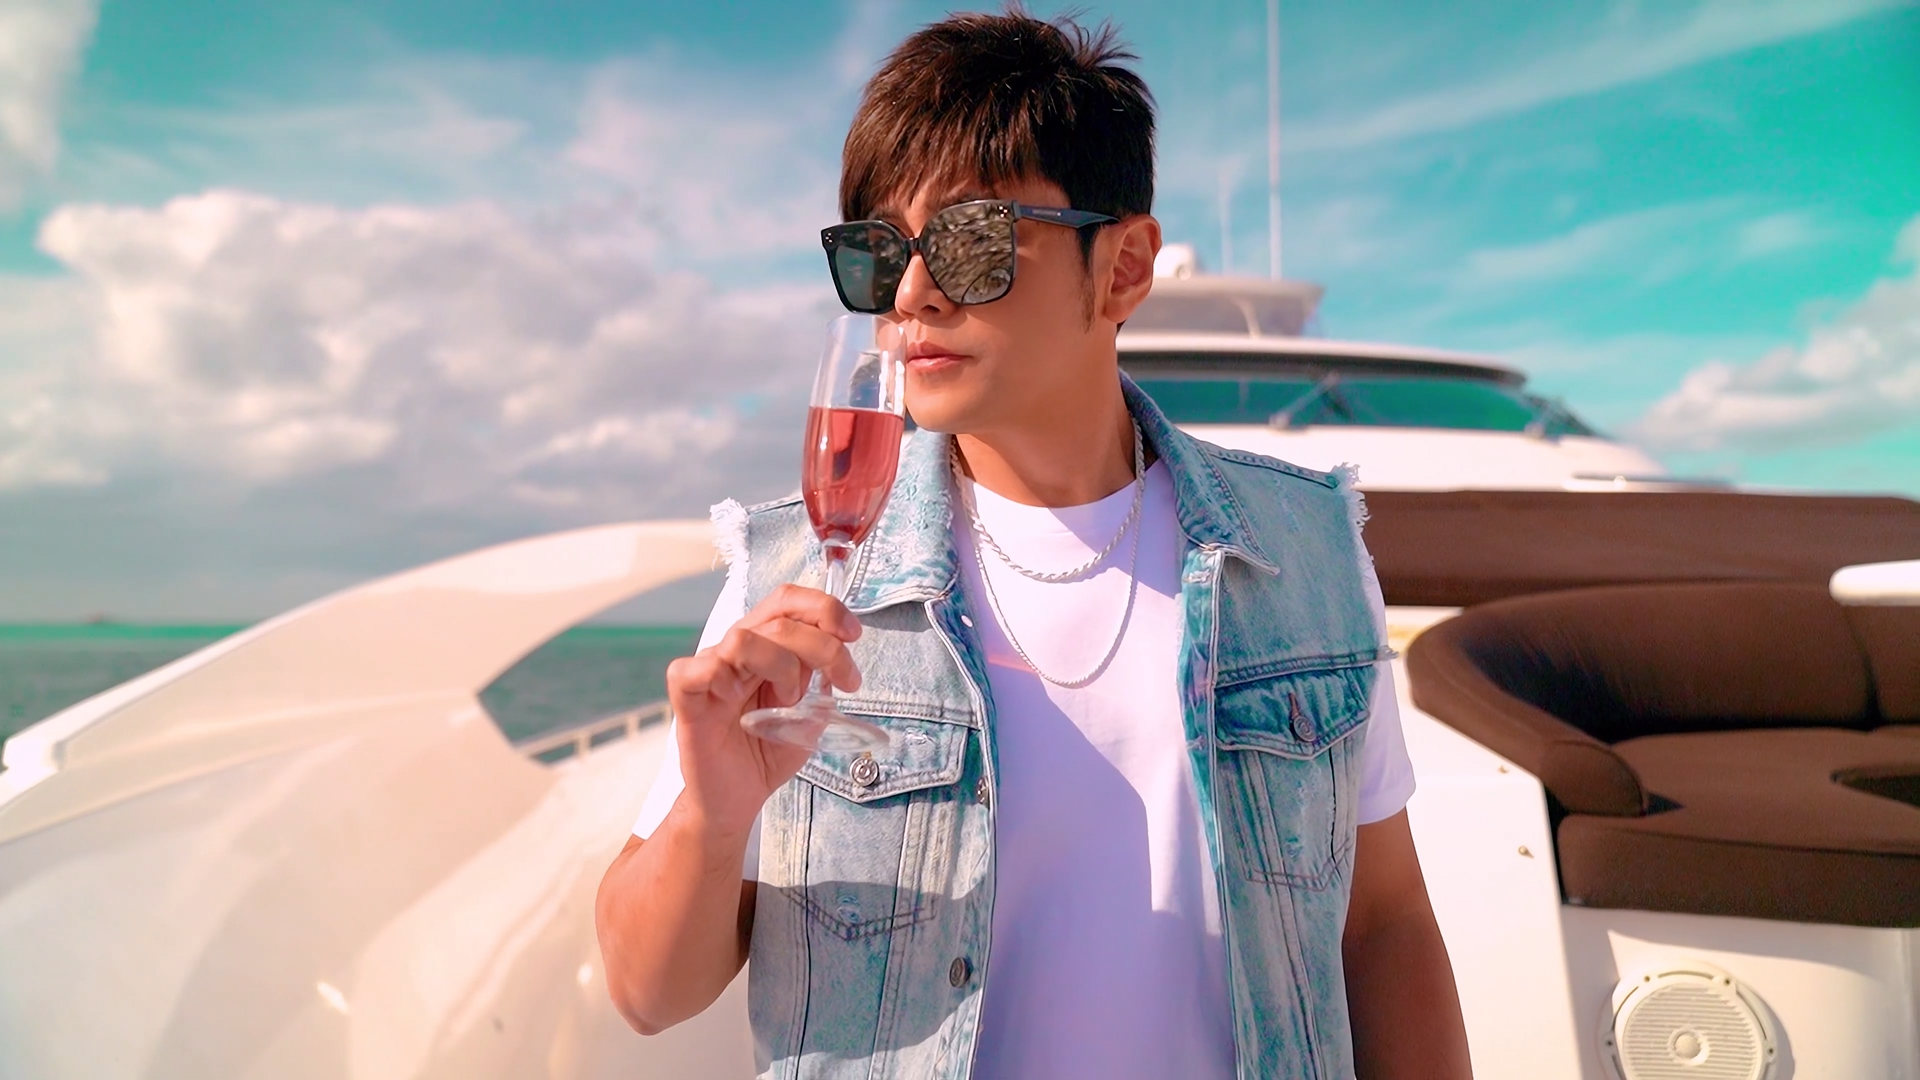 Jay Hong Hong Drink Sunglasses Boat Clouds Necklace 1920x1080